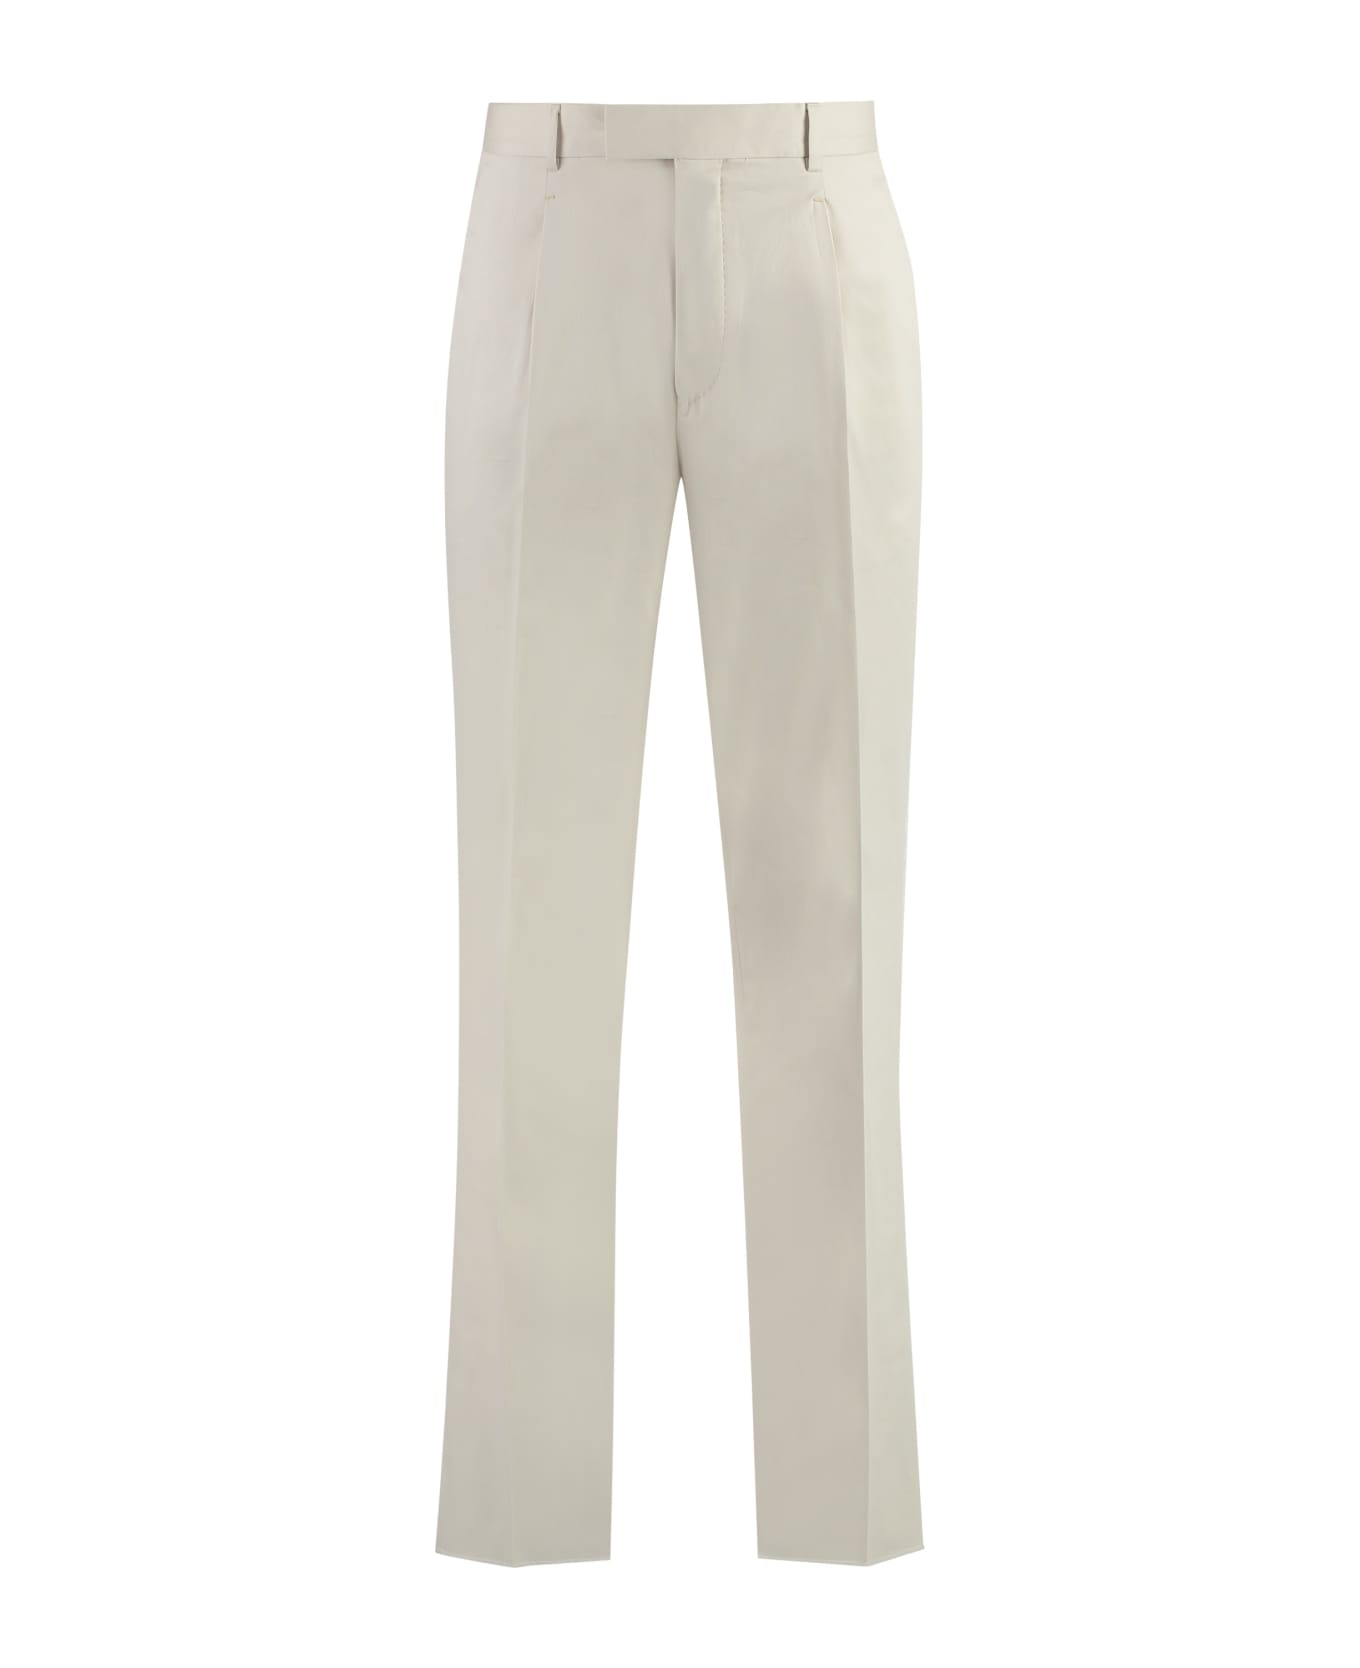 Zegna Stretch Cotton Chino Trousers - Ivory